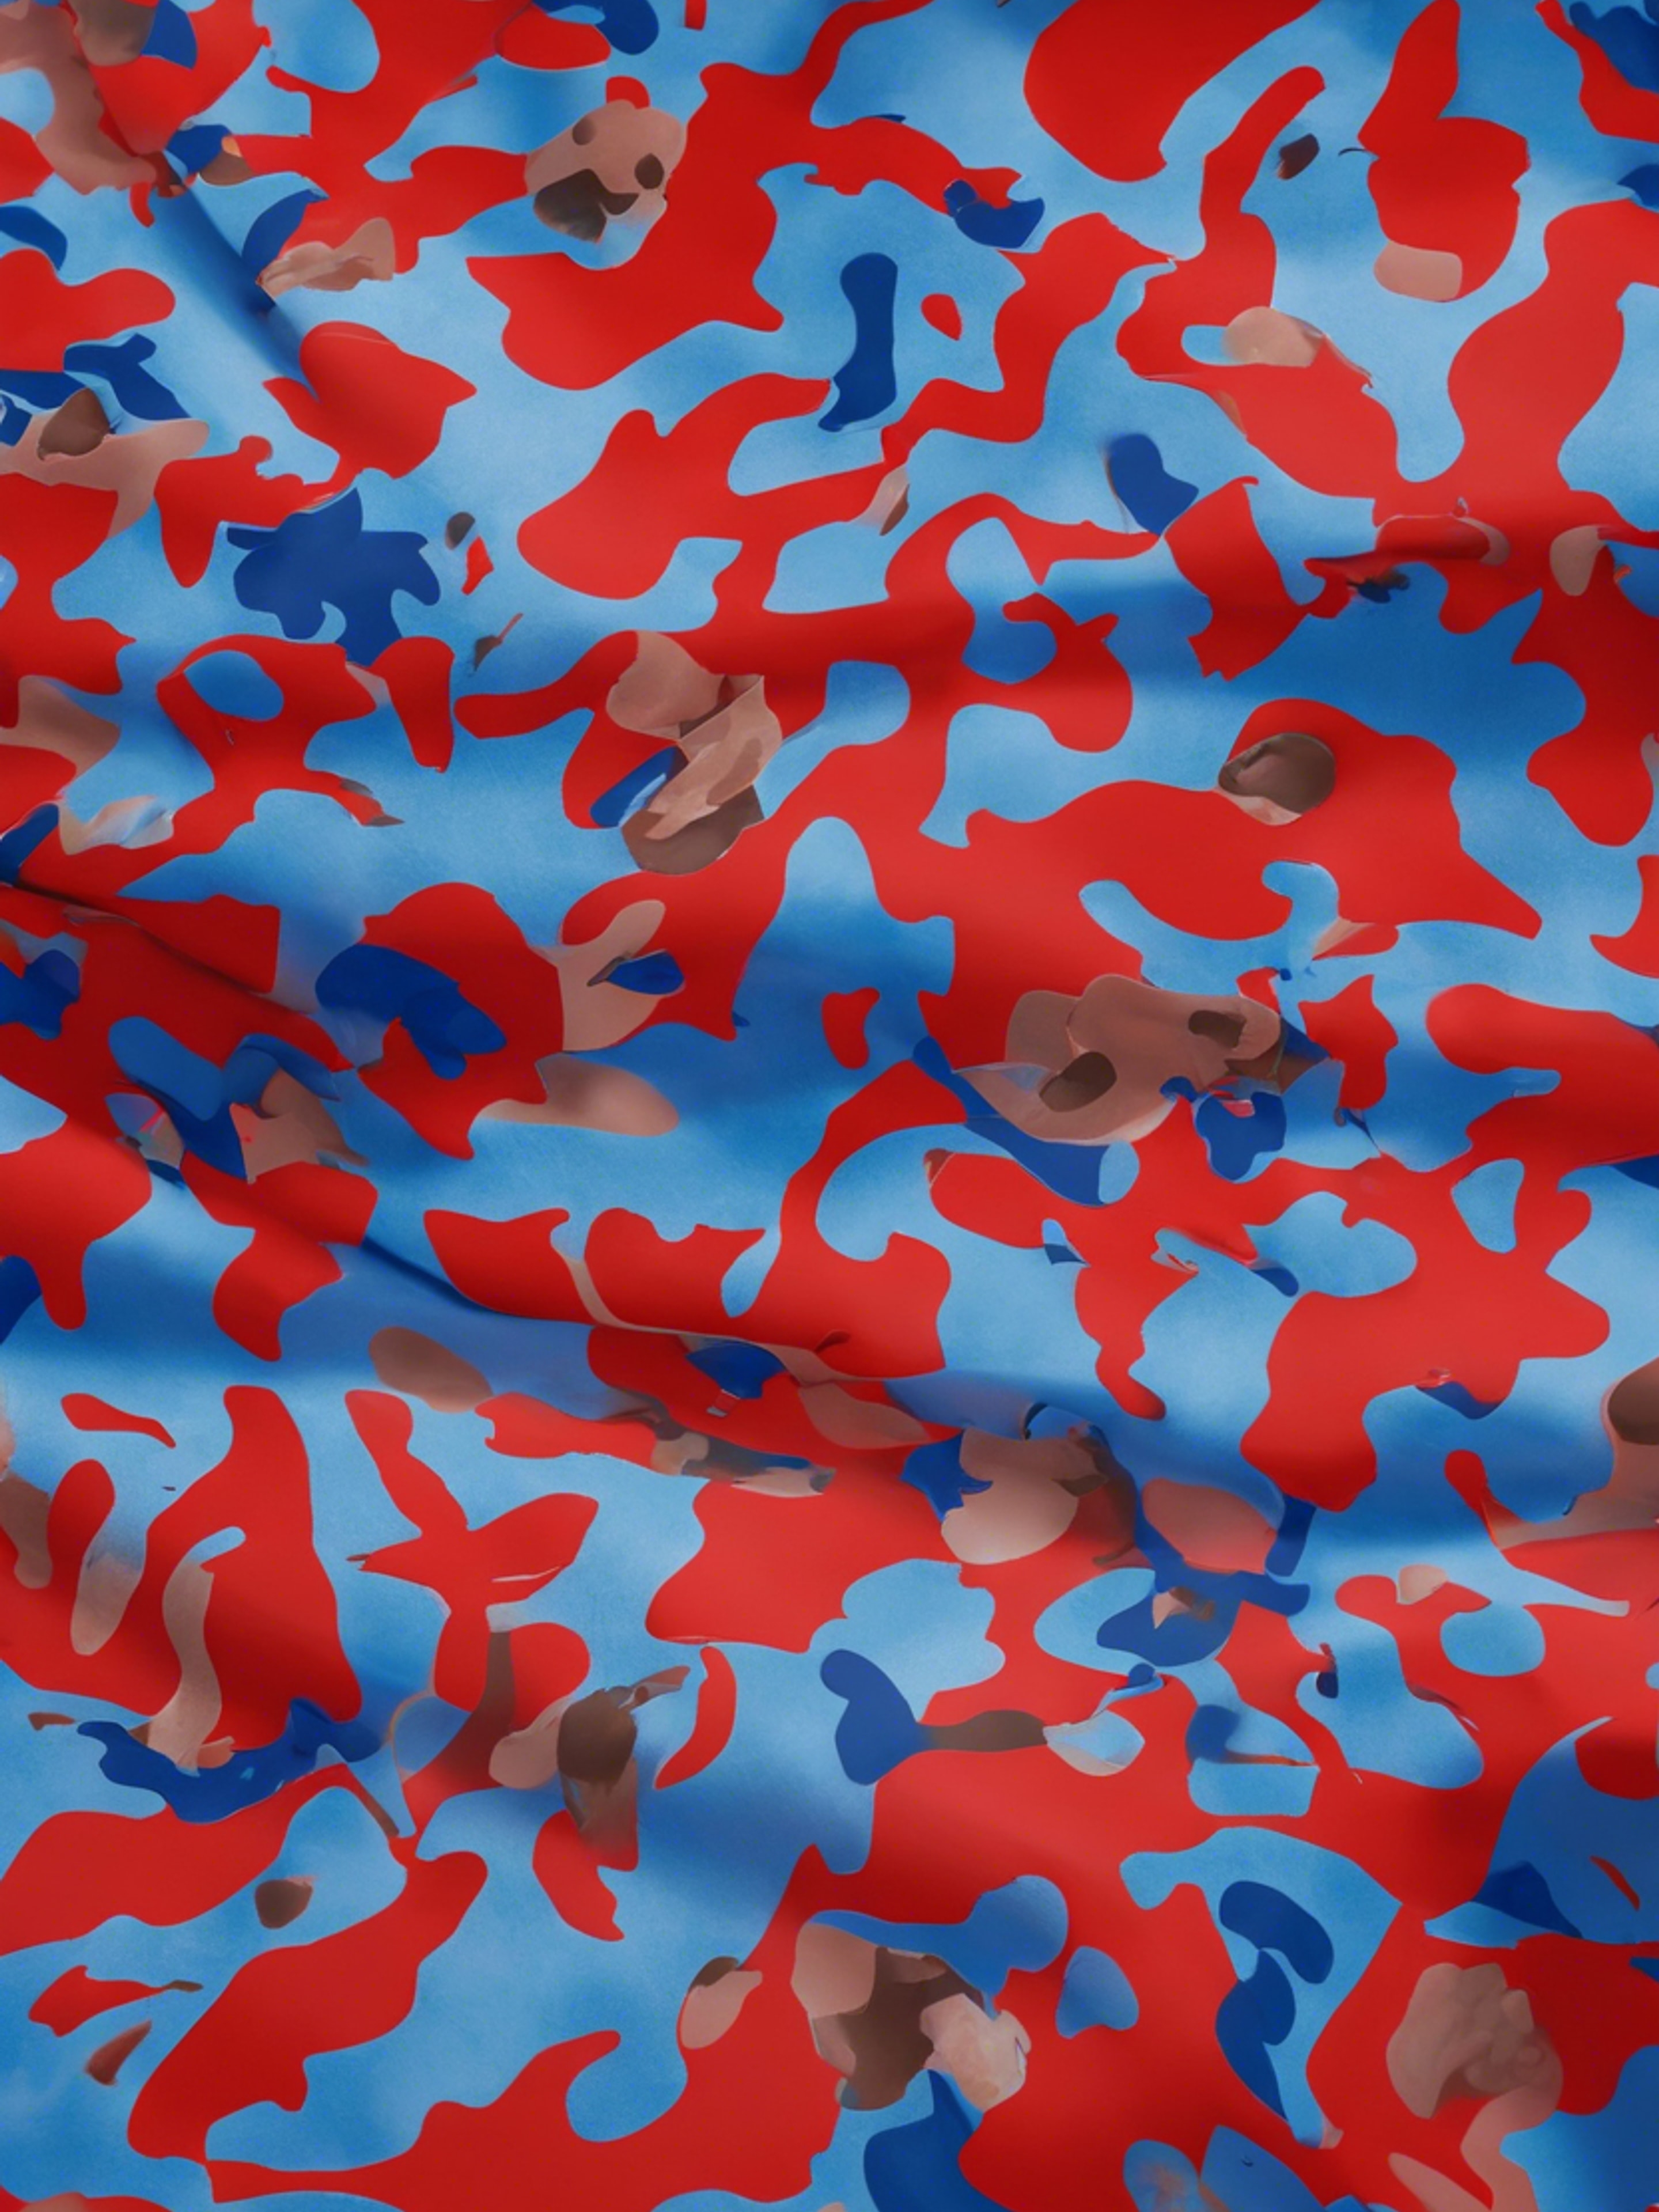 High-quality red and blue camouflage wrapping paper. 벽지[4b47f7d82a744ca8b045]